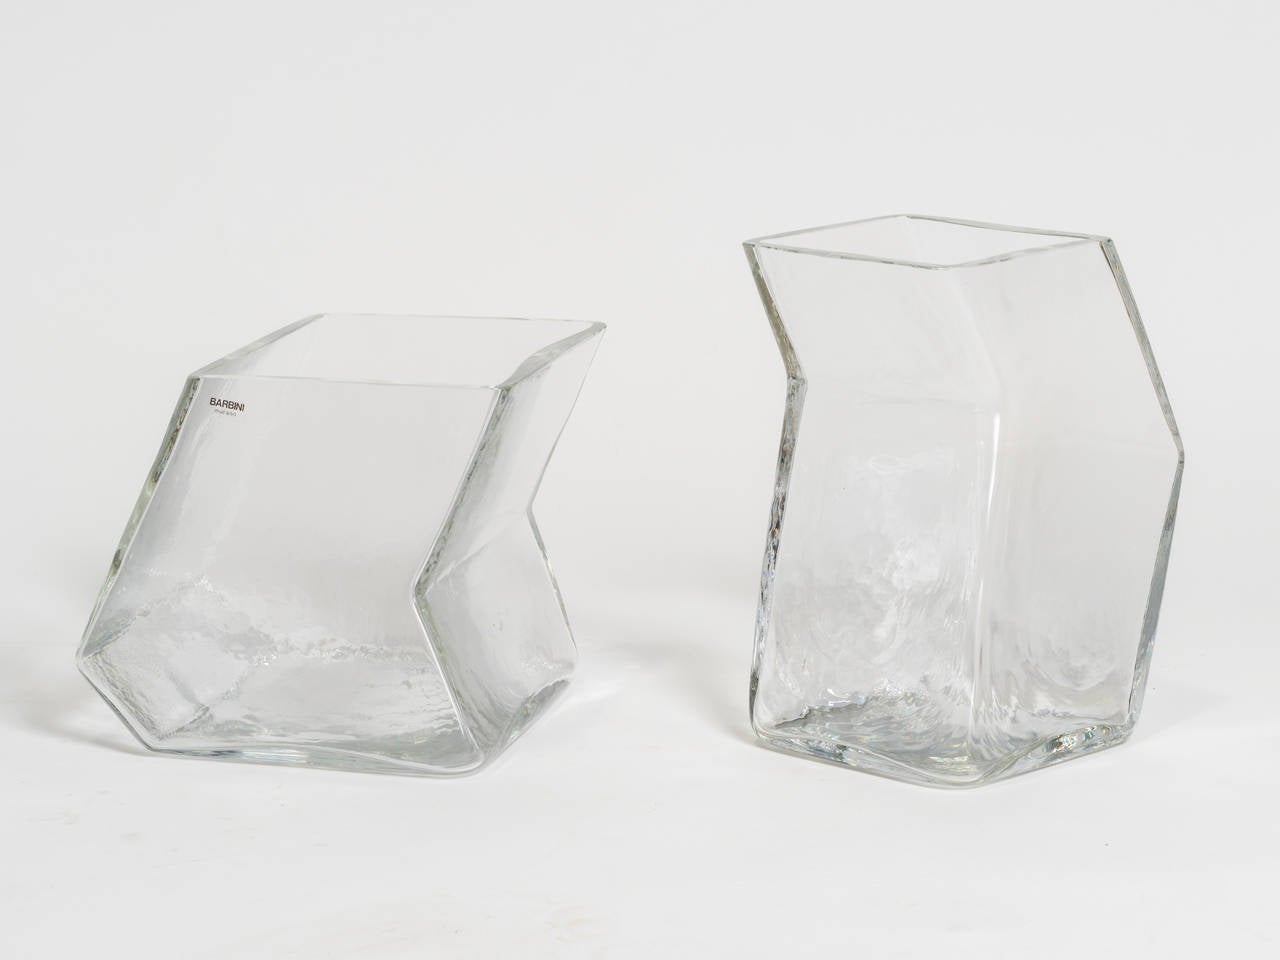 Large Pair of Vintage Architectural Glass Vases, Signed Barbini For Sale 2